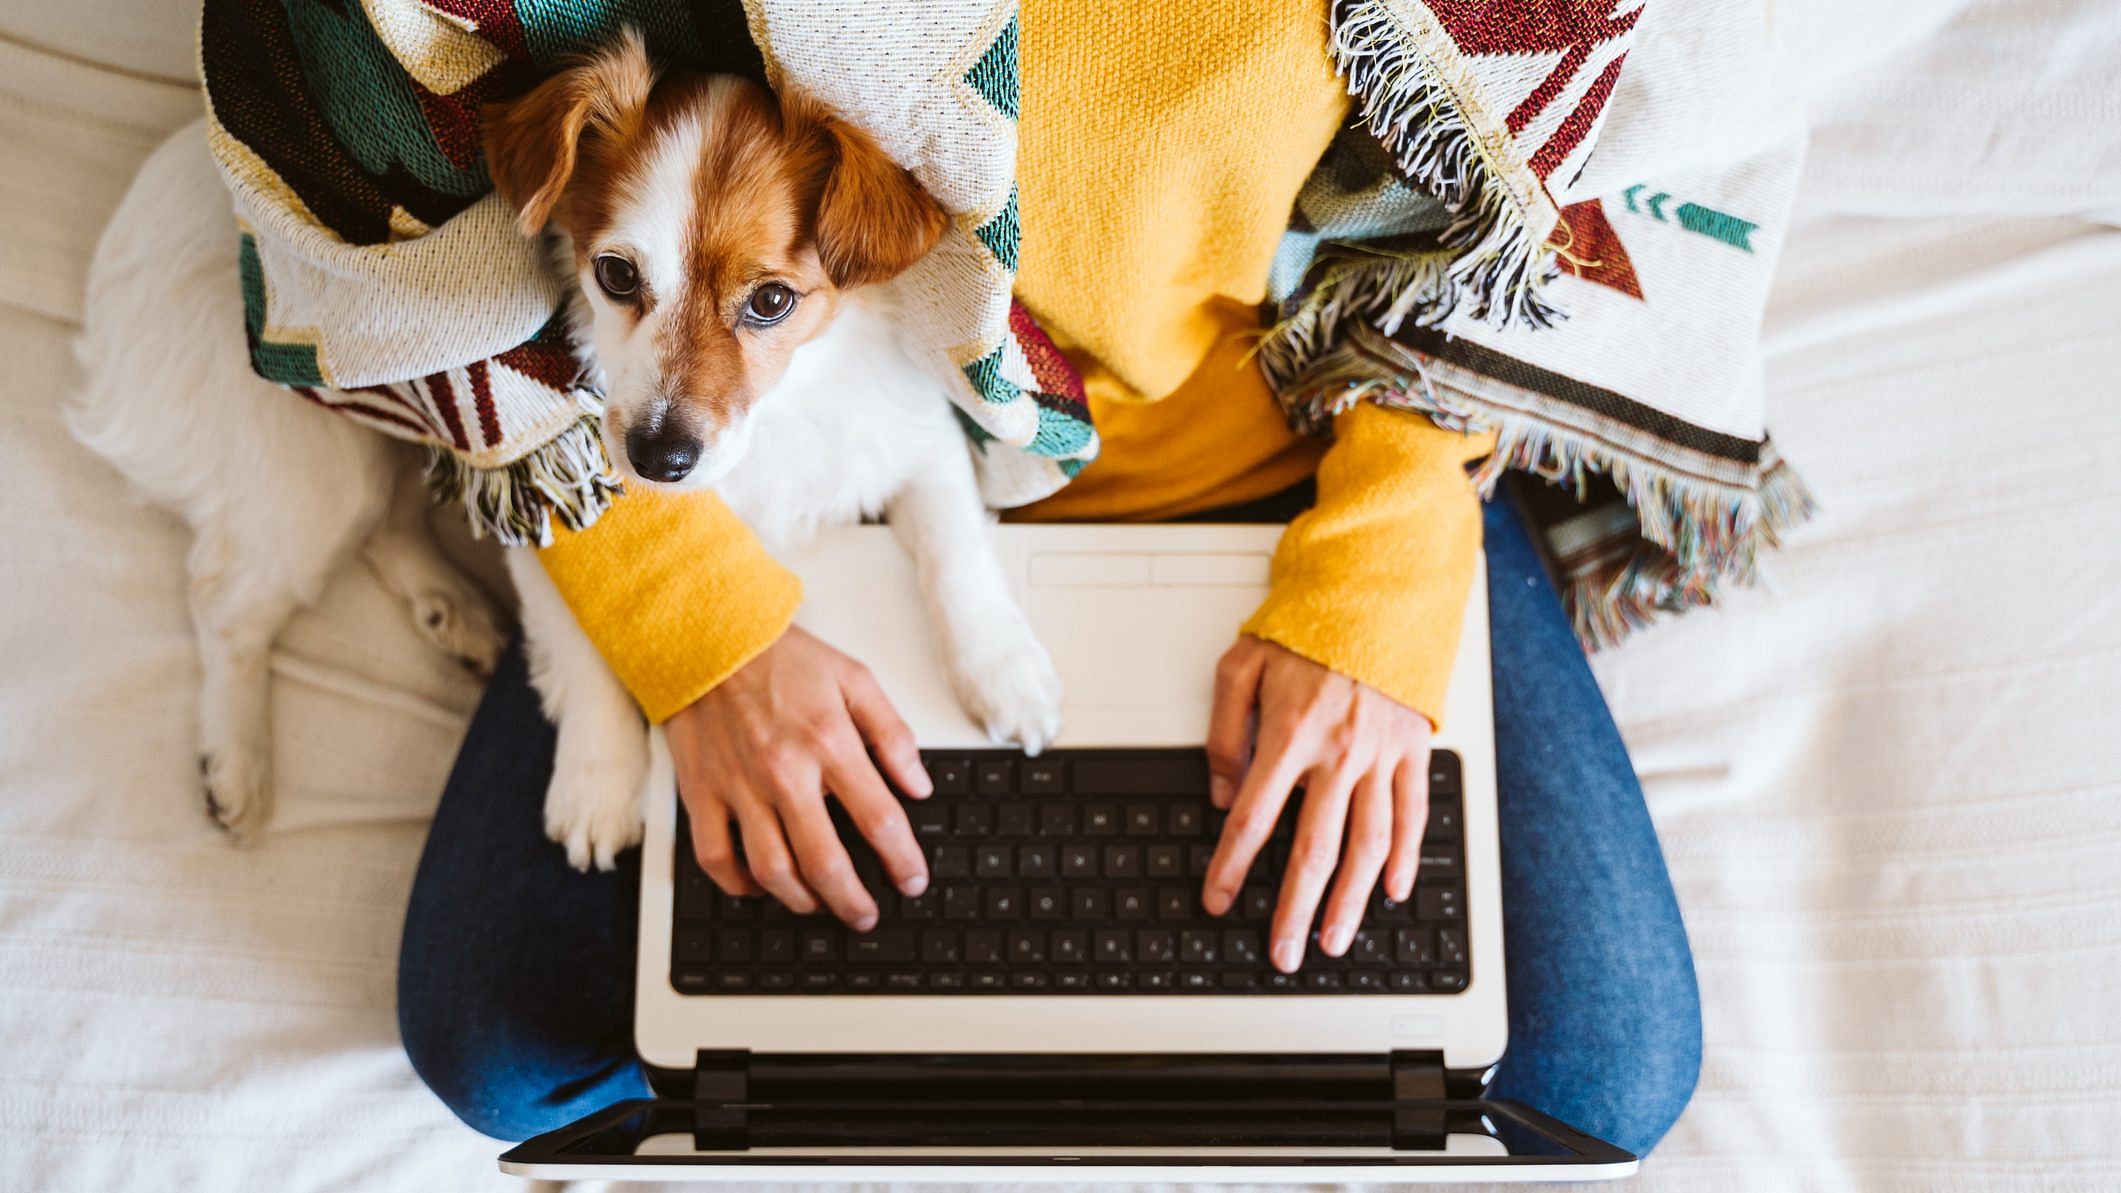  Average annual household pet spending reached $770 in 2021, up 13 per cent from 2019, according to the Labor Department — outpacing an 8.5 per cent increase in consumer prices. Credit: iStock Photo